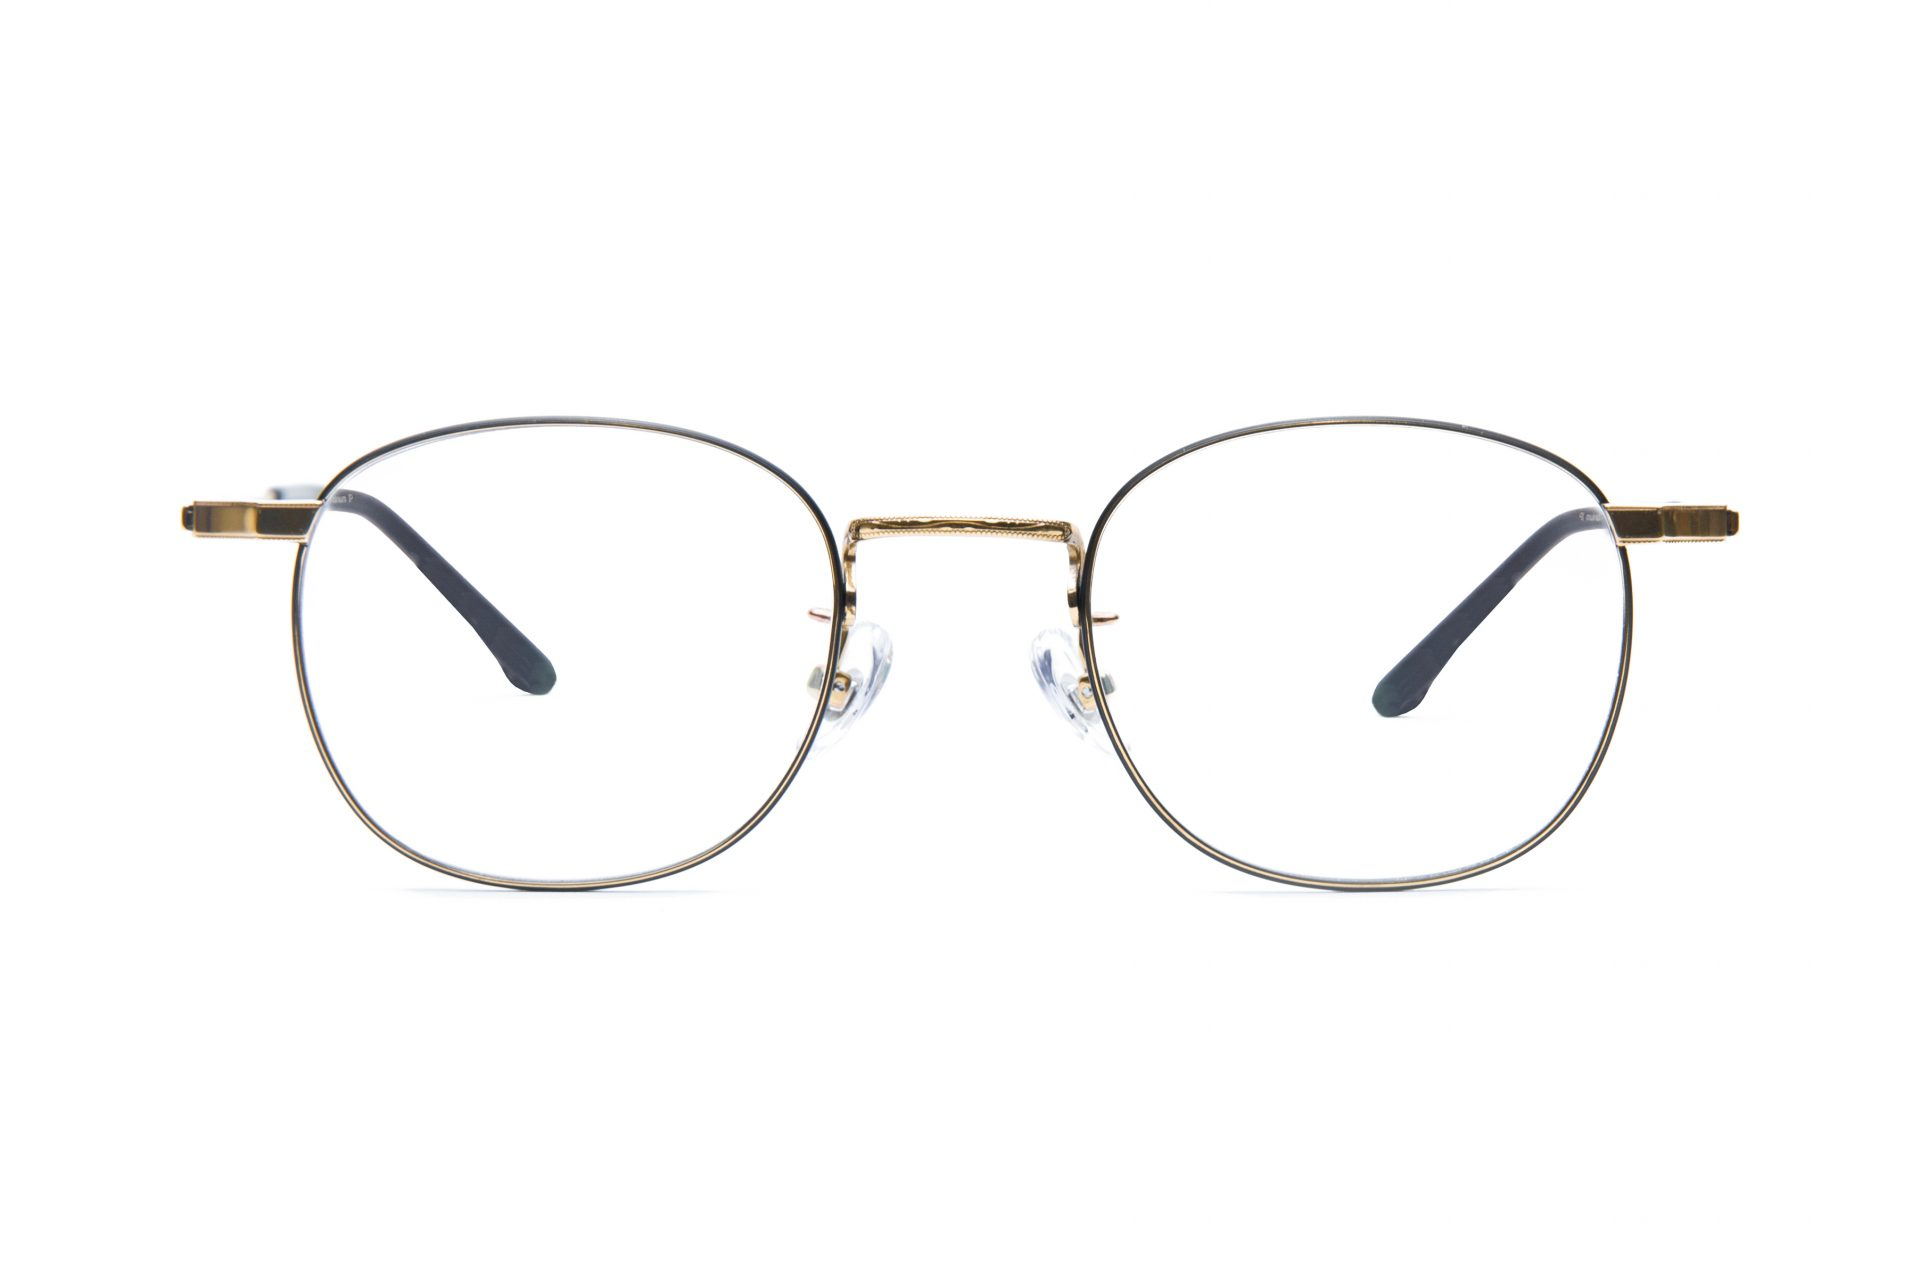 A pair of round metal-framed eyeglasses with a double bridge design on a white background.